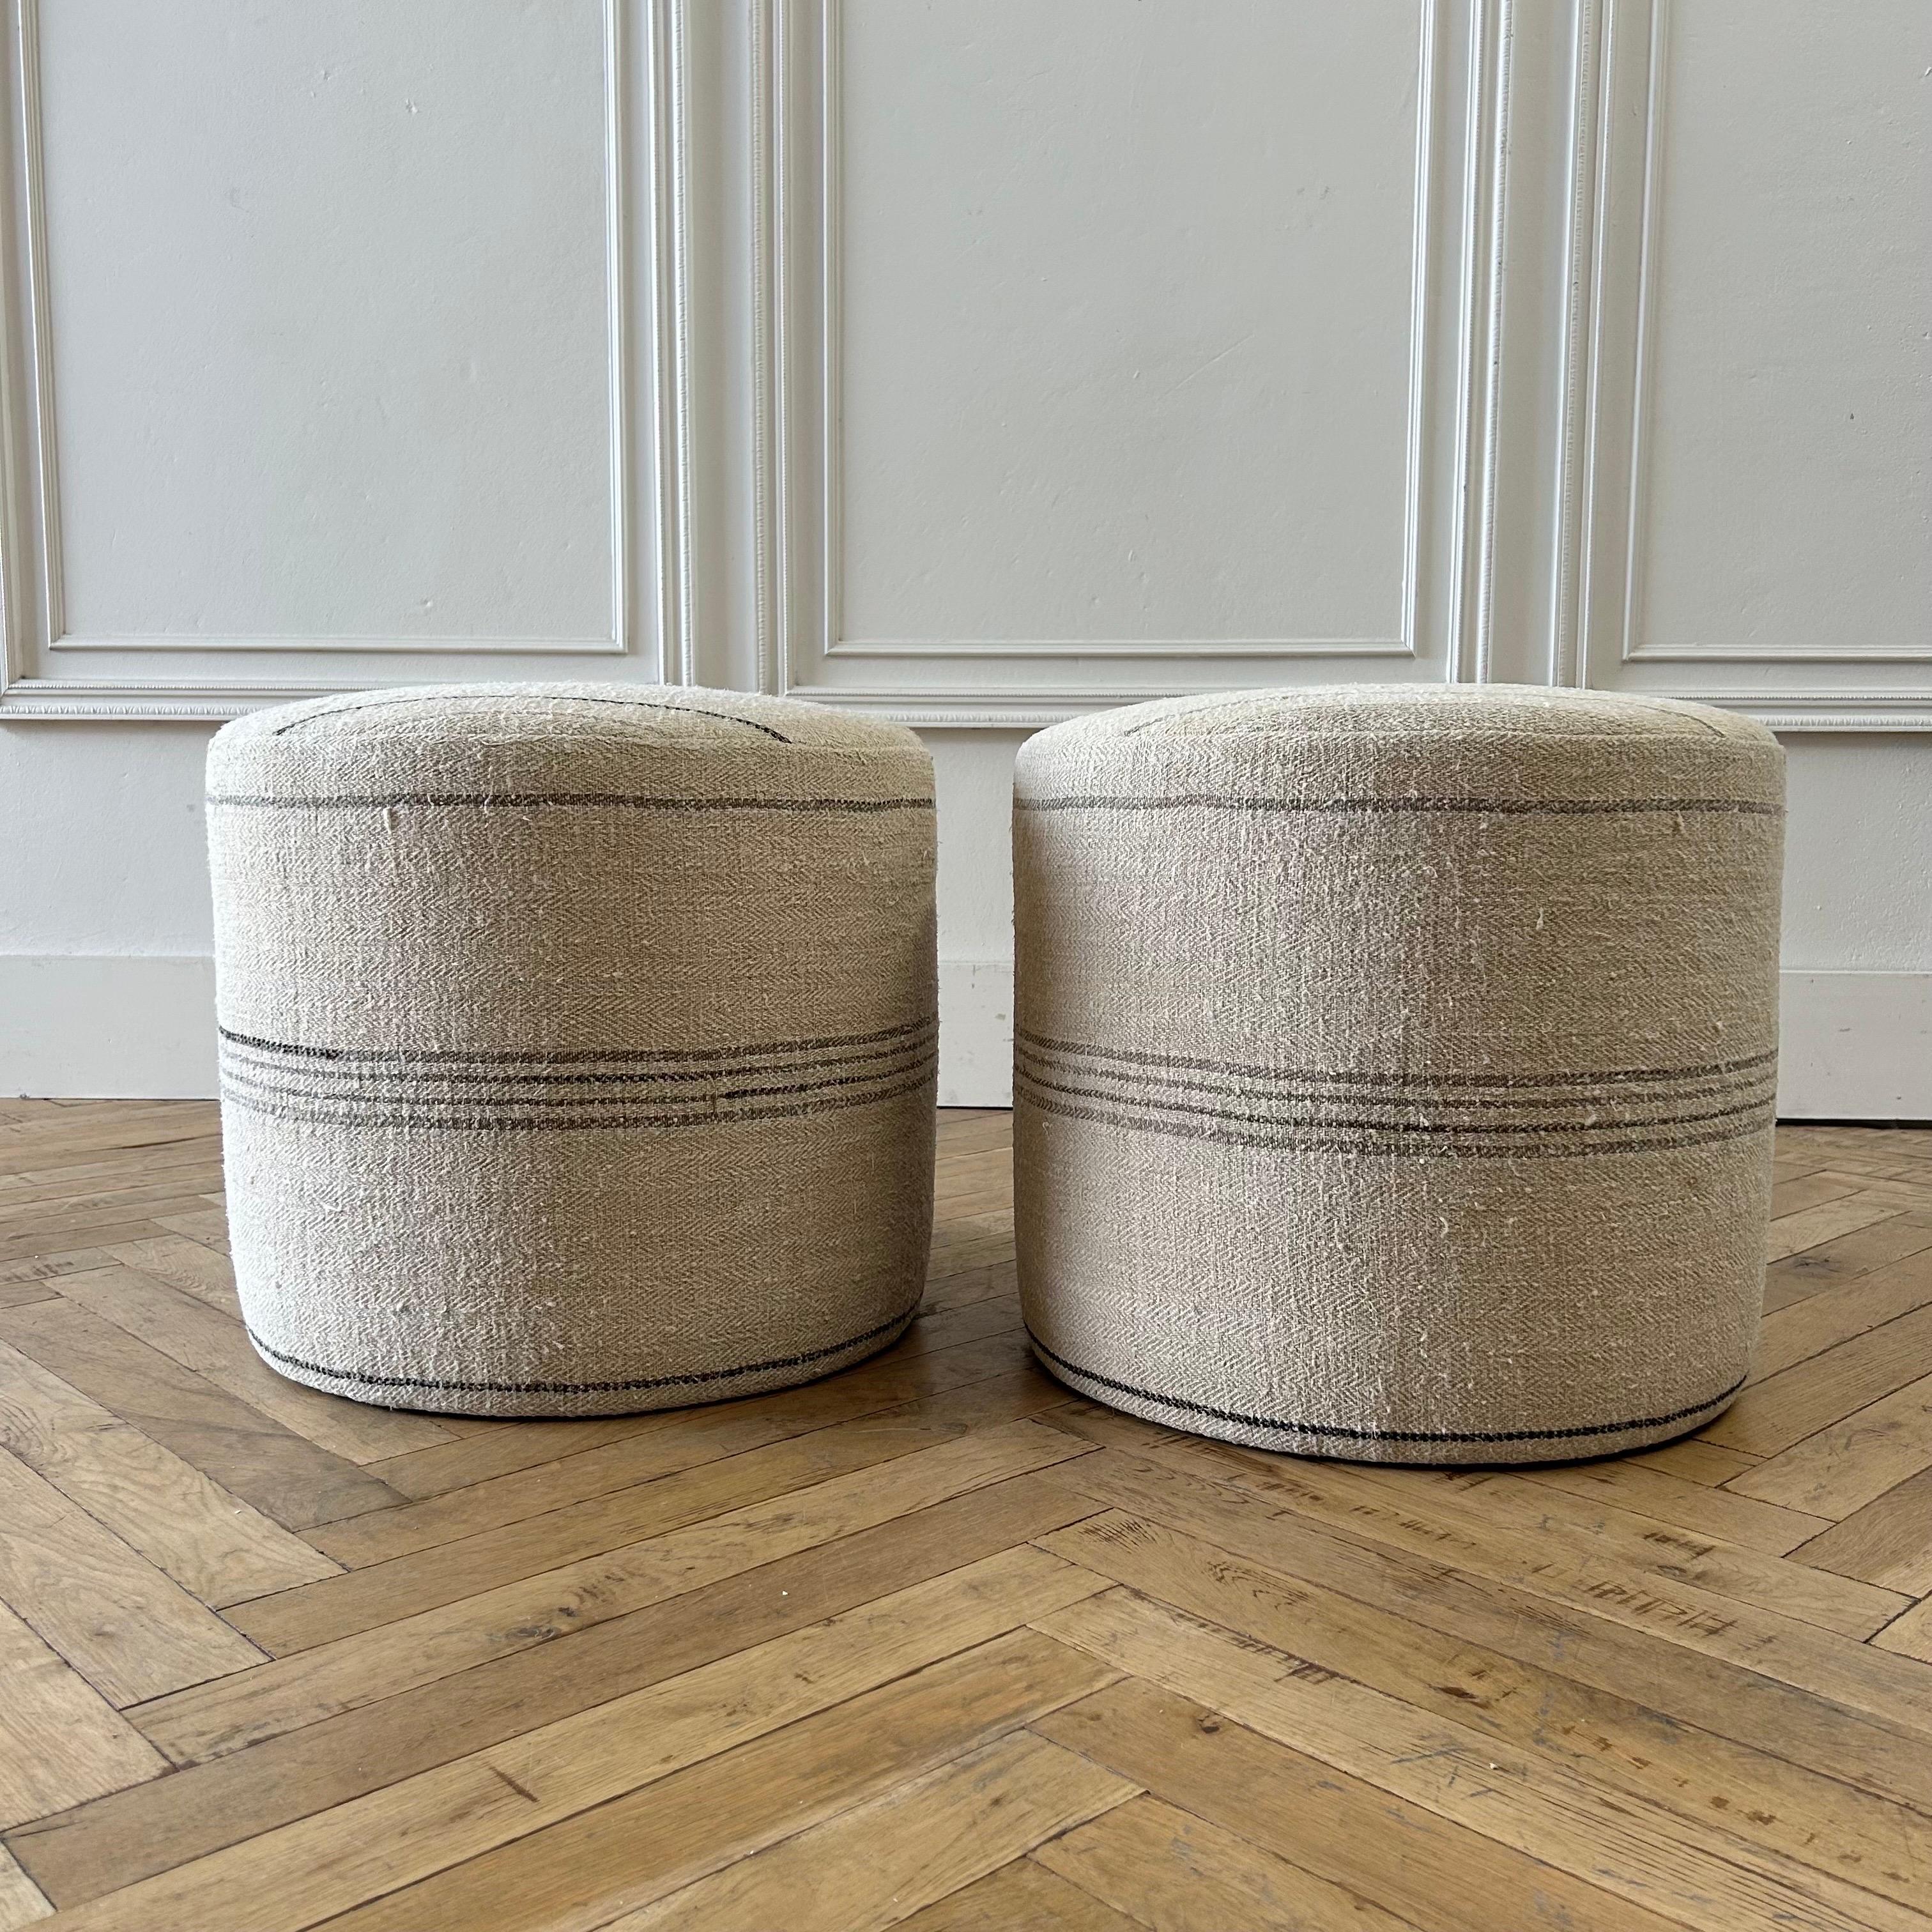 Sold only as a set.
Pair Rd. Cube ottoman 21”rd. X 18”h
Custom made from vintage european flax with stripes.
Color: Natural / Flax, with stripes in gray and coal.
Sits medium to firm, can be used everyday. This will not lose shape as the frame